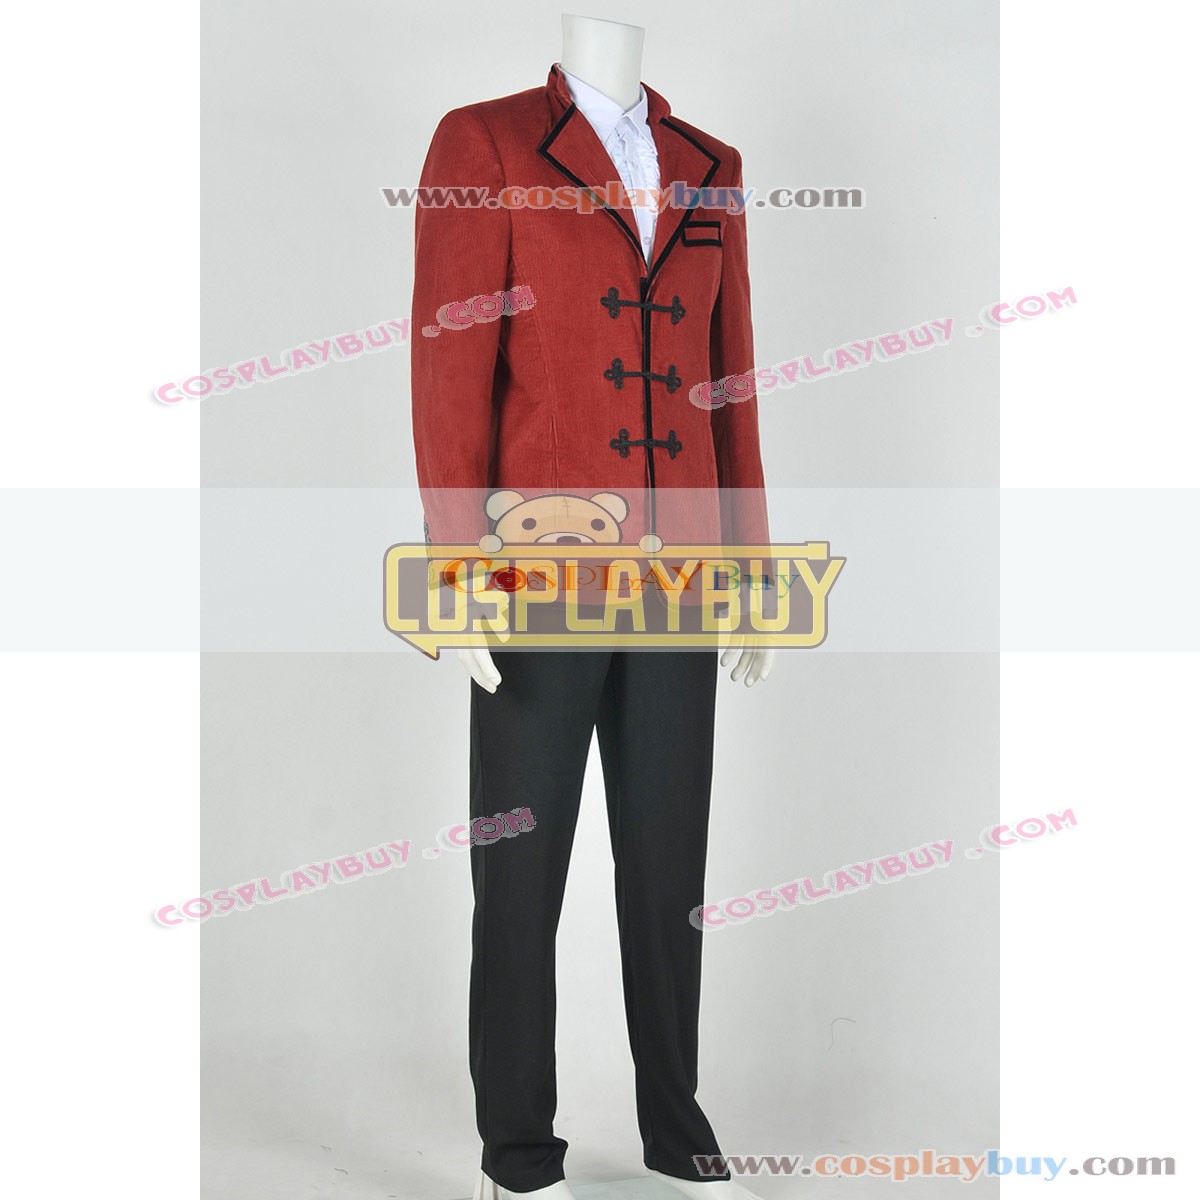 The Third Doctor Costume Jacket Who is 3rd Dr Jon Pertwee Costume Jacket Coat